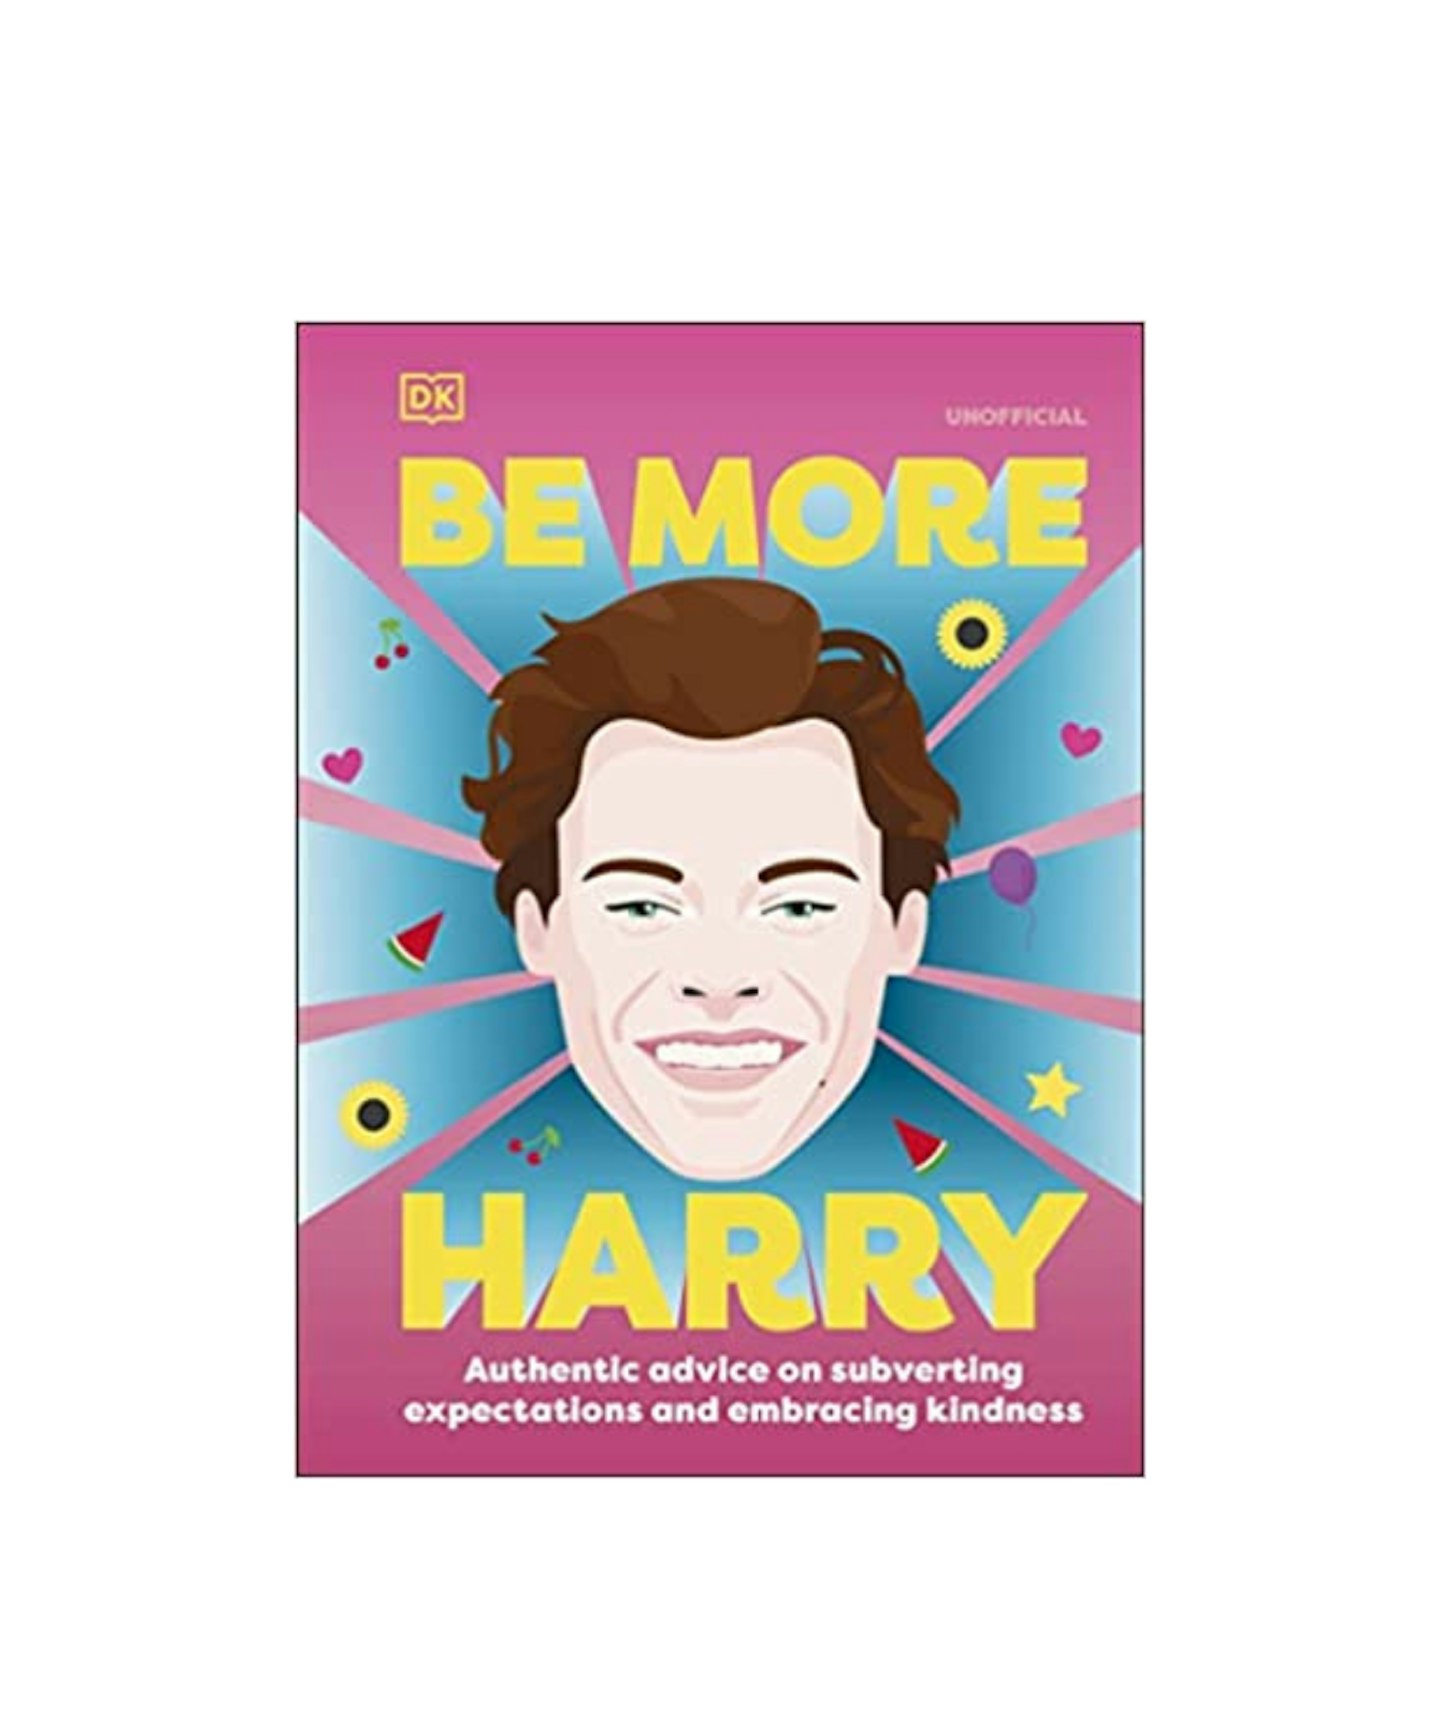 Be More Harry Styles Book